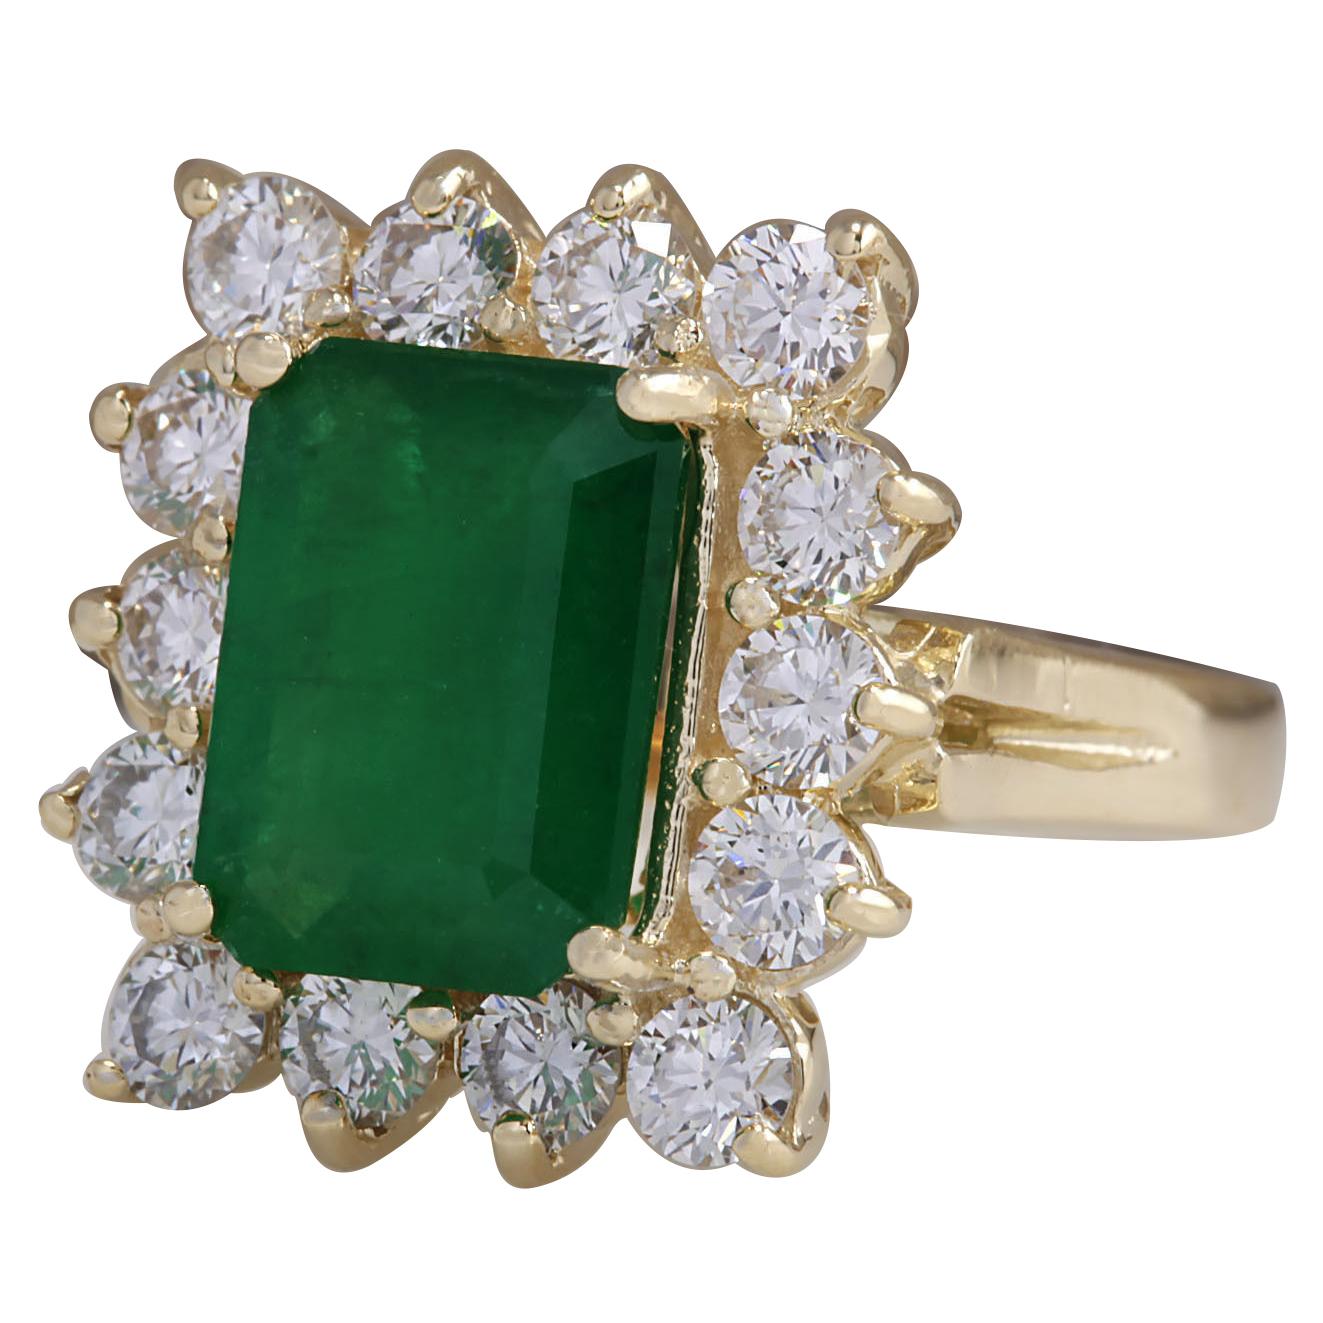 4.91 Carat Emerald 14 Karat Yellow Gold Diamond Ring
Stamped: 14K Yellow Gold
Total Ring Weight: 6.7 Grams
Total  Emerald Weight is 3.39 Carat (Measures: 11.00x9.00 mm)
Color: Green
Total  Diamond Weight is 1.52 Carat
Color: F-G, Clarity: